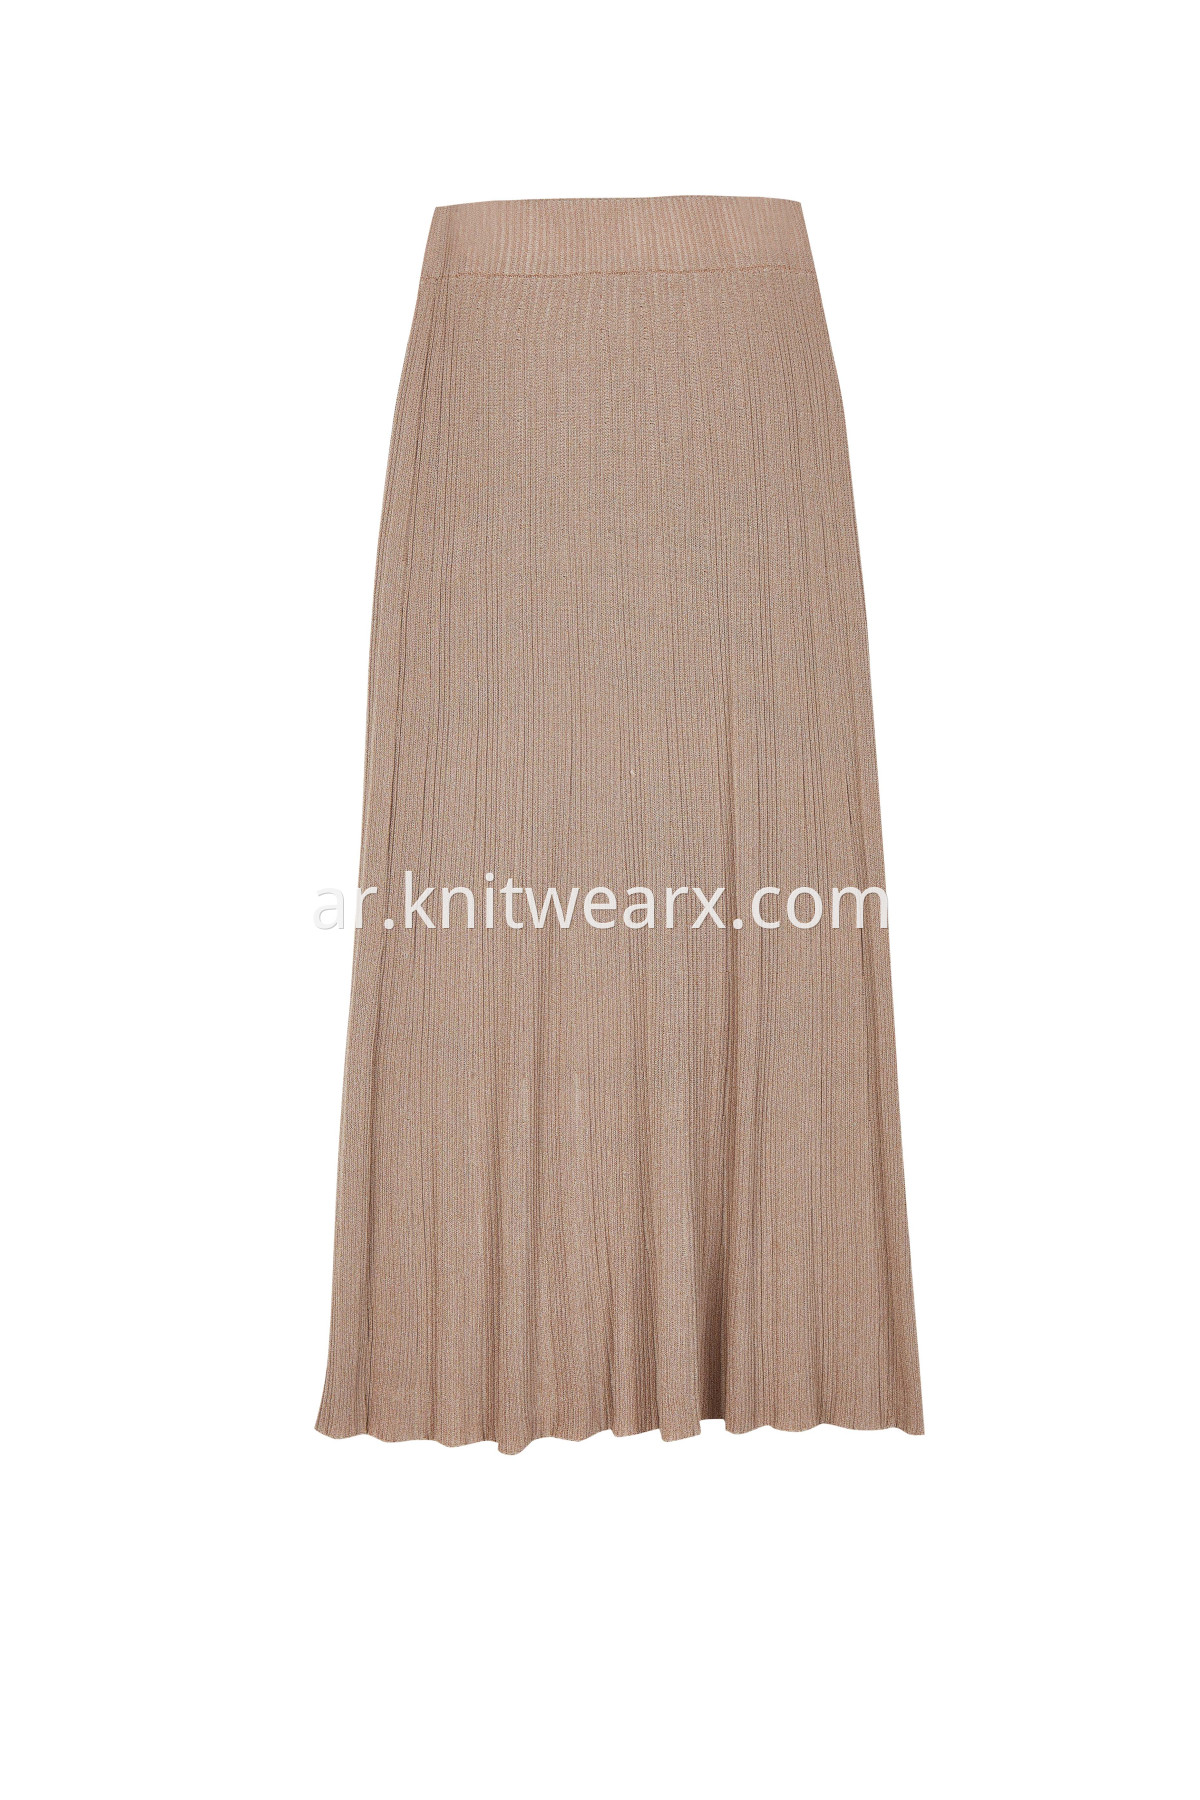 Women's High Waist Stretchy Pleated Knitted Skirt